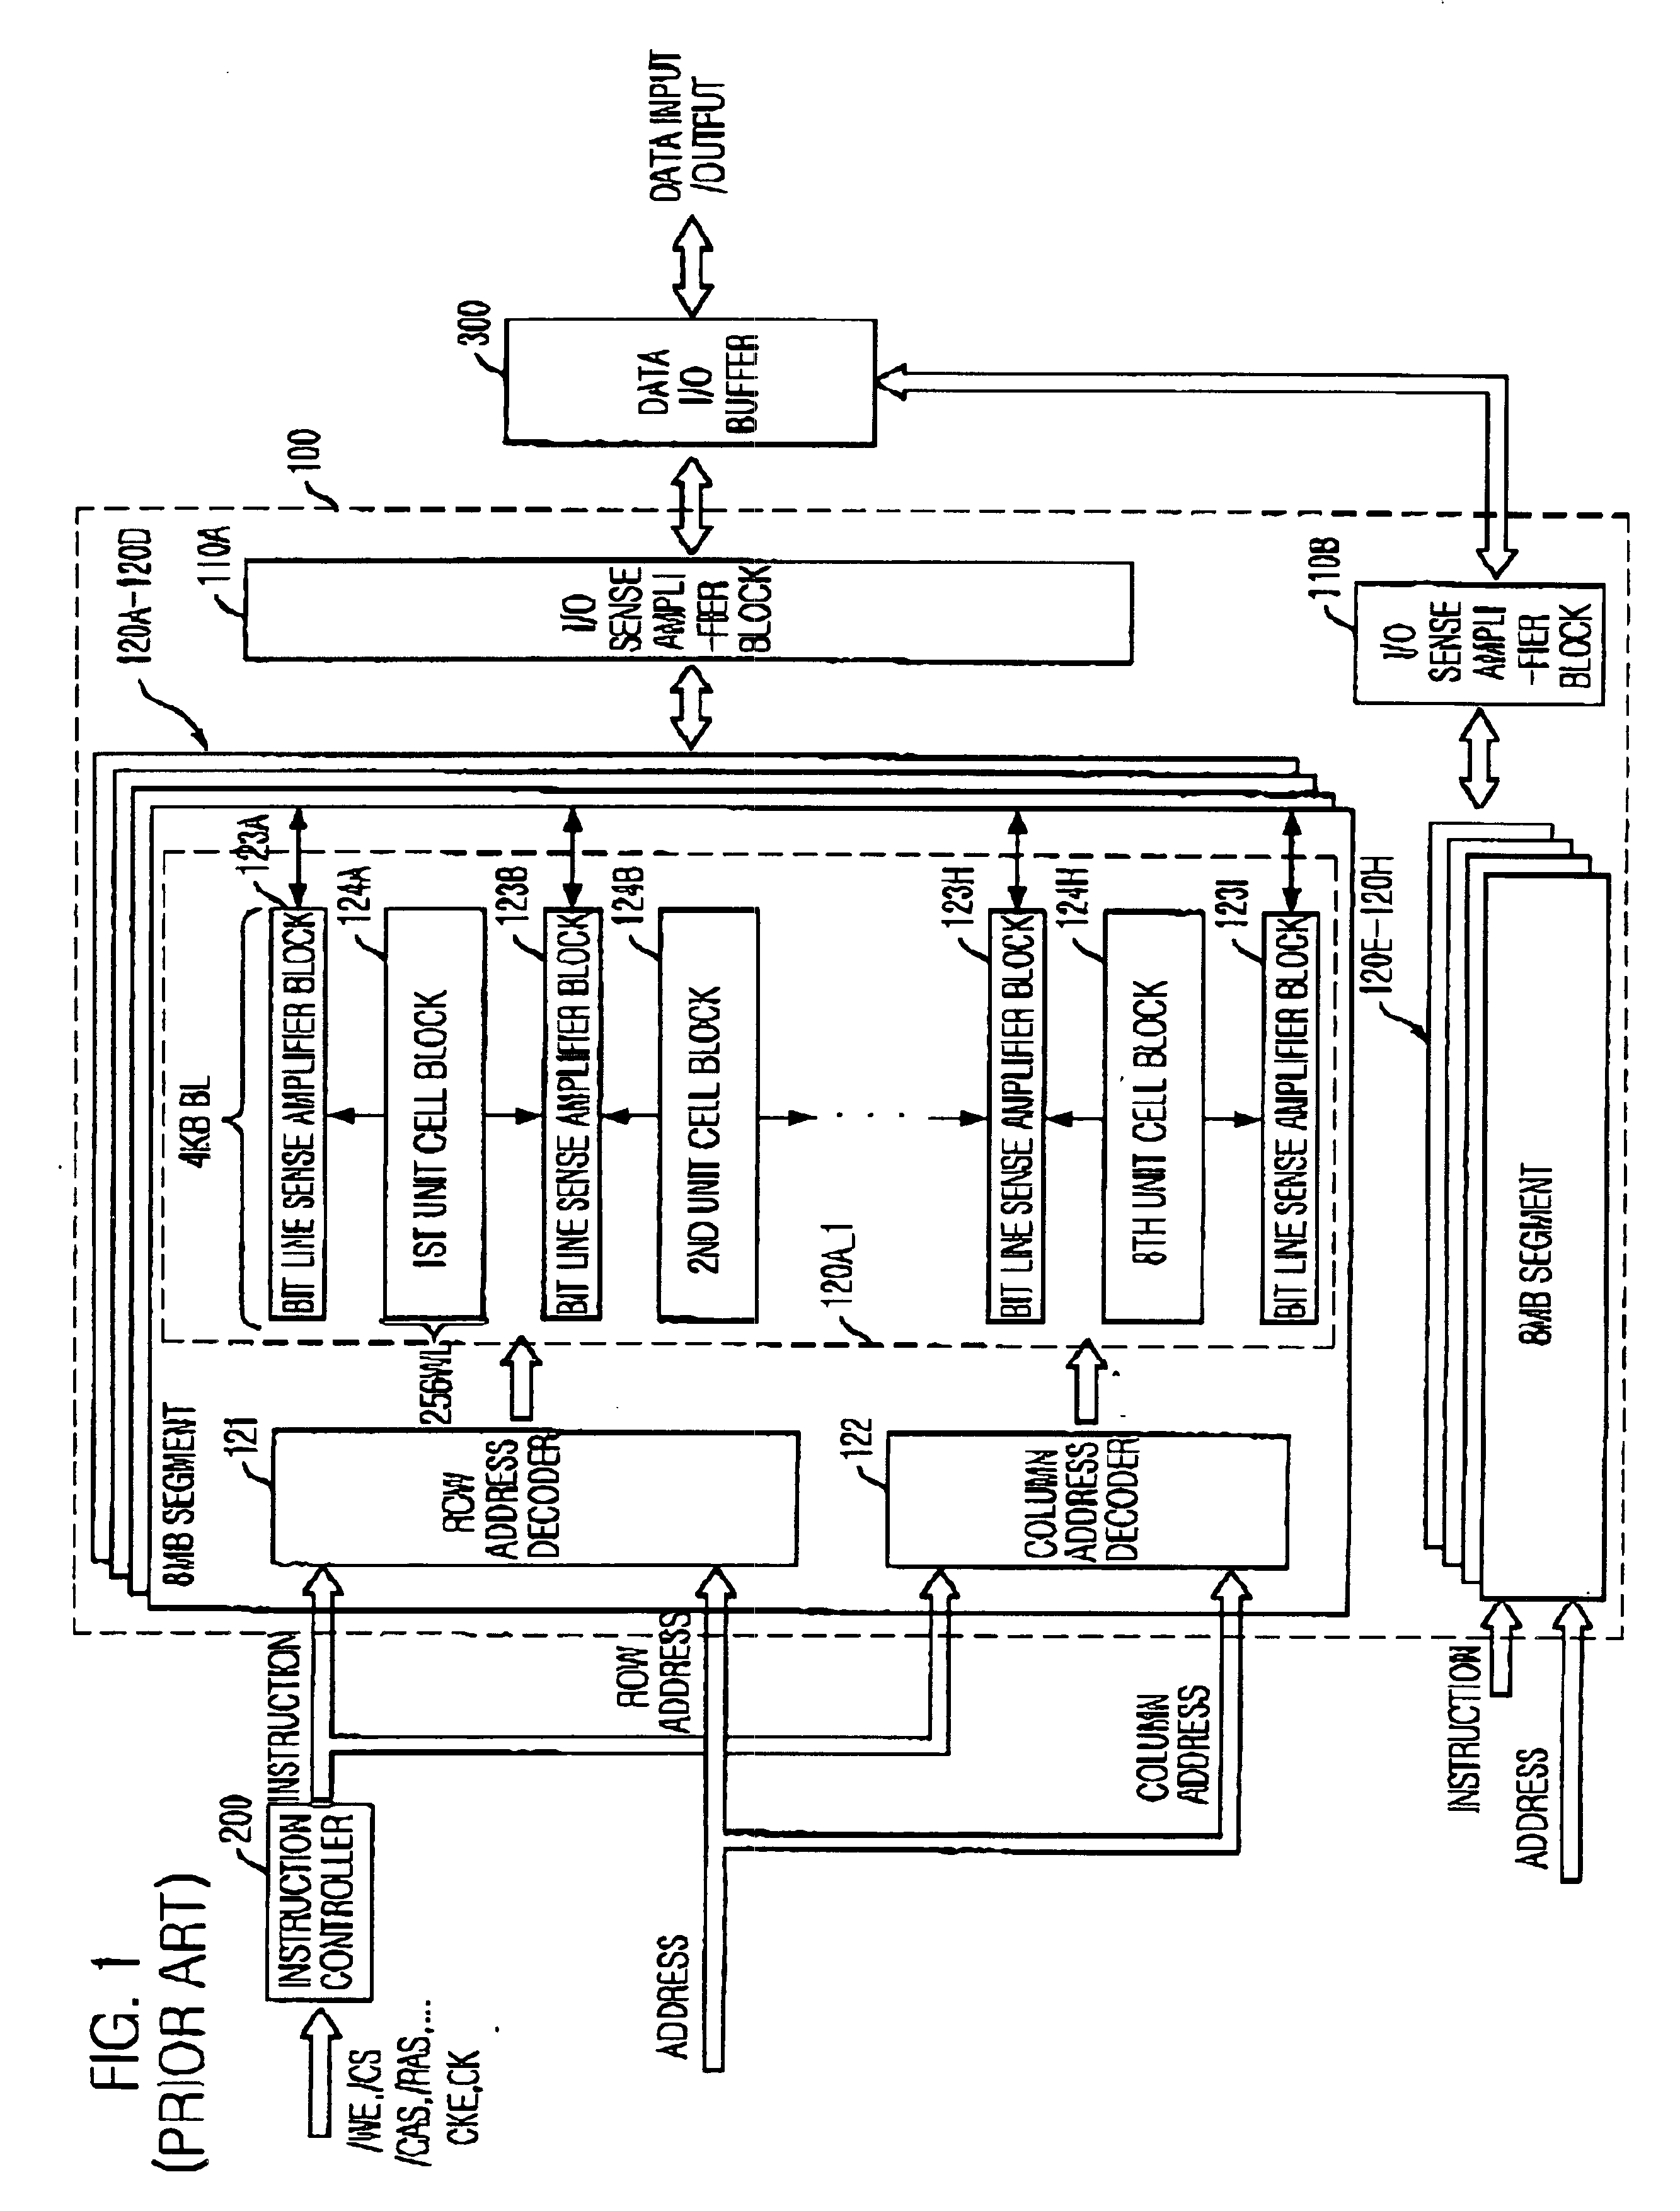 Semiconductor memory device with reduced data access time